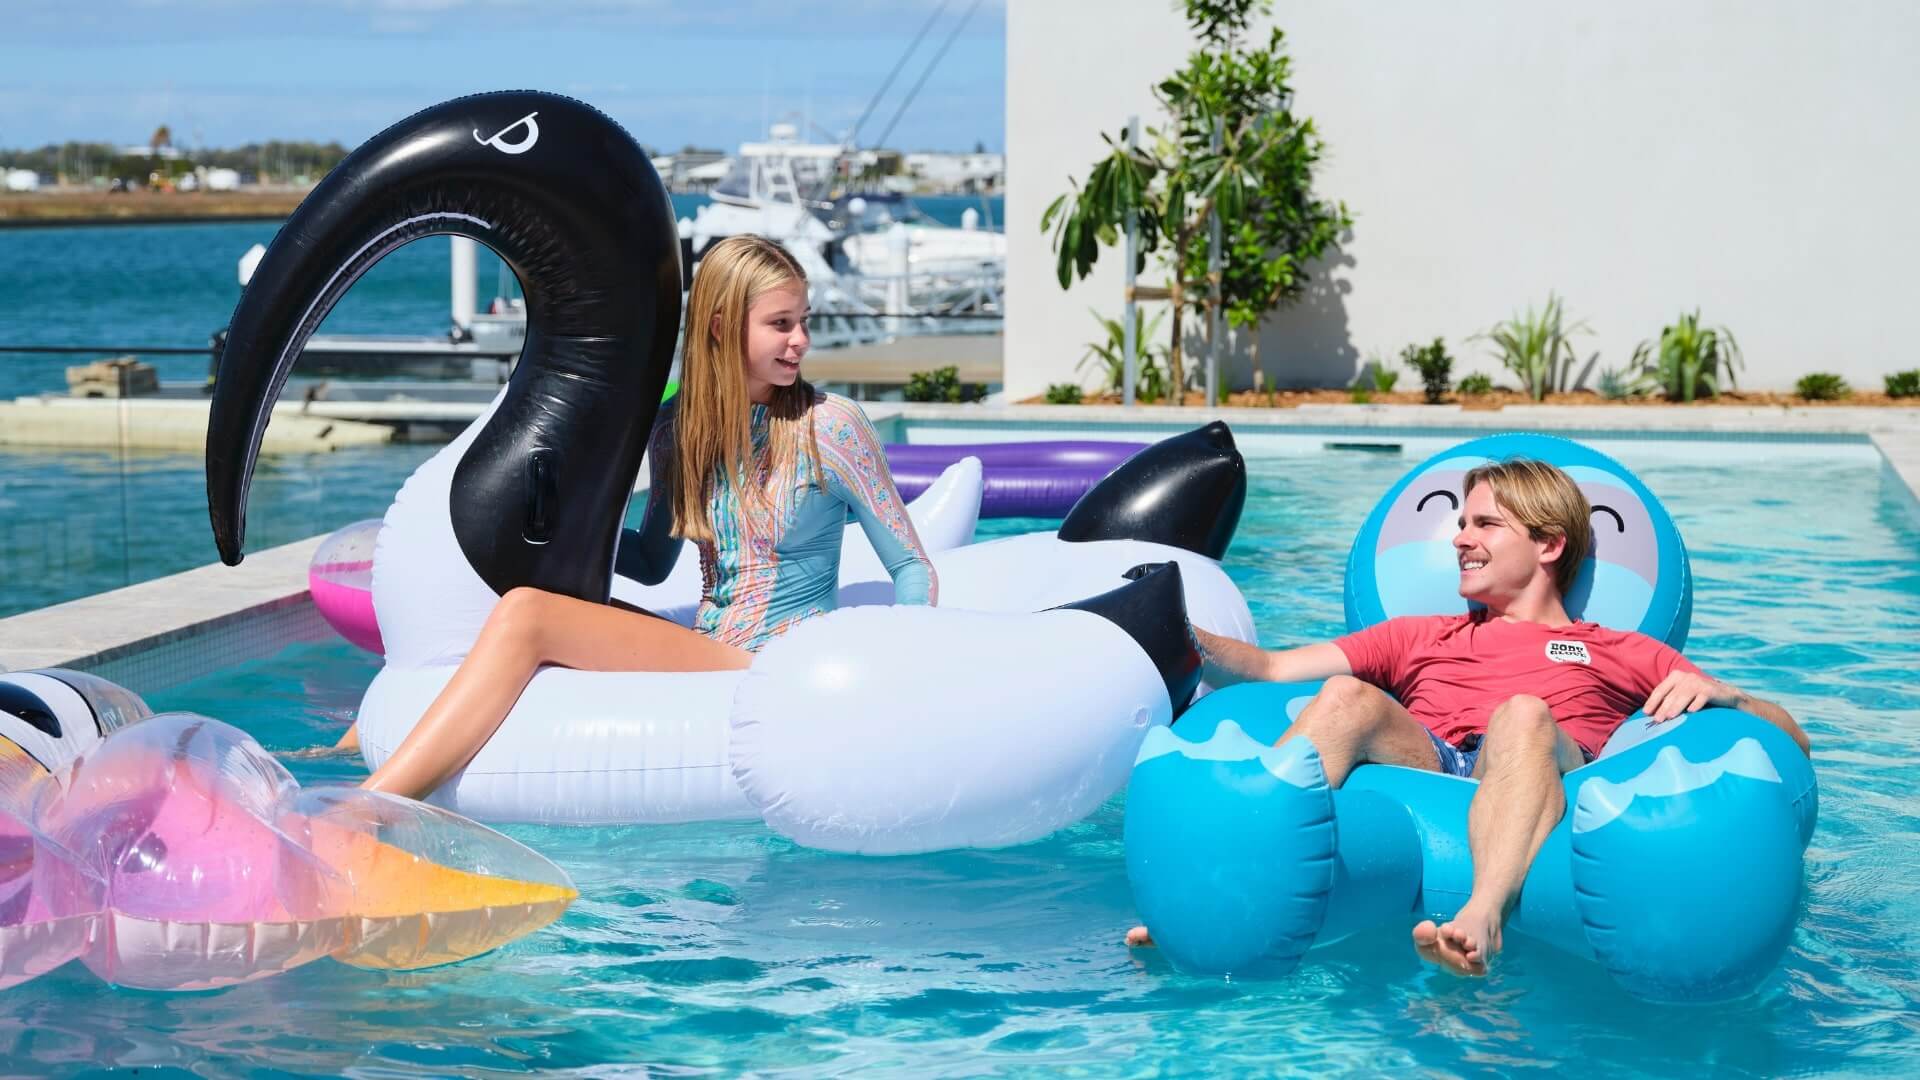 How To Inflate Pool Toys Correctly